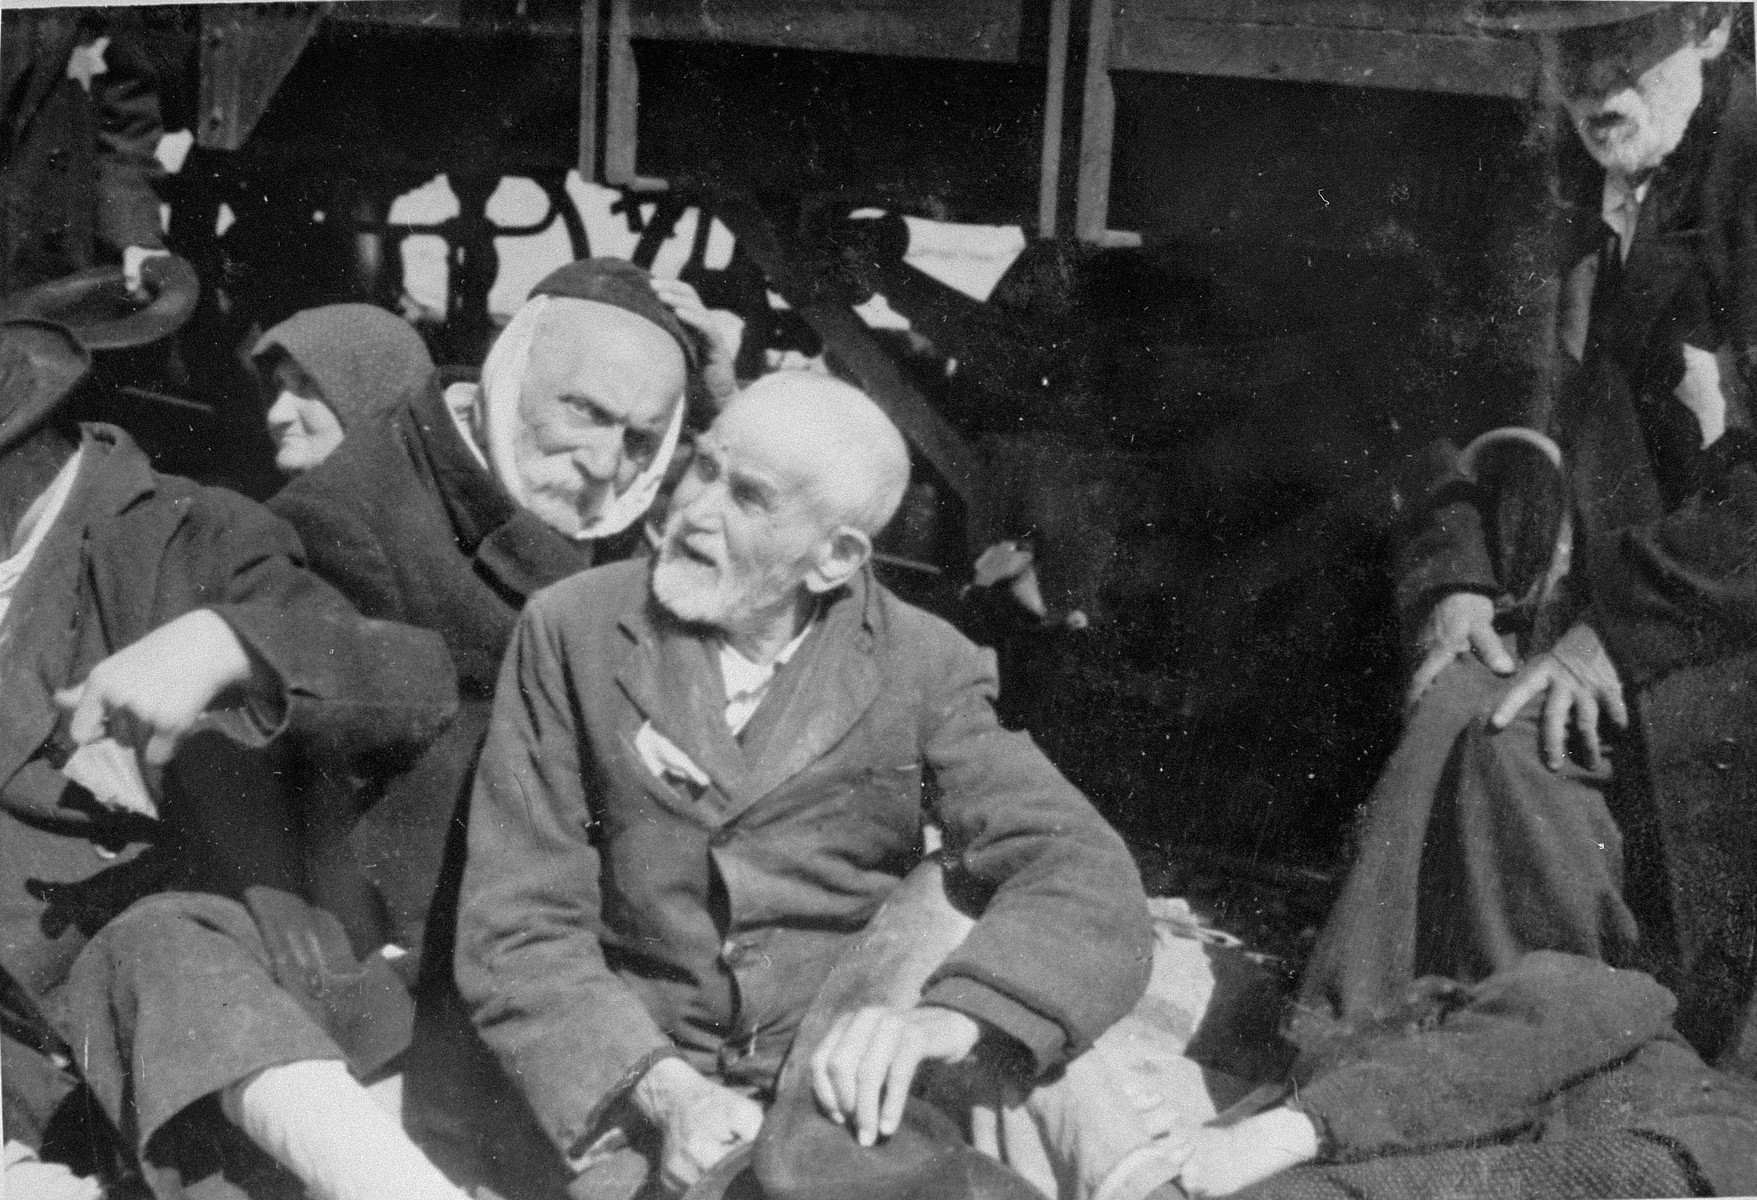 Elderly Jewish men from Subcarpathian Rus sit next to a railcar in Auschwitz-Birkenau prior to being sent to the gas chambers. 

Seated on the left is Henryk Naftoli Herz Adler.  He is wearing a handkerchief to cover his face because his beard was forcibly cut off.  Seated at the right is Samuel (Sandor) Ben Yehuda Kohn. The man on the far right is Lili Jacob's paternal grandfather.